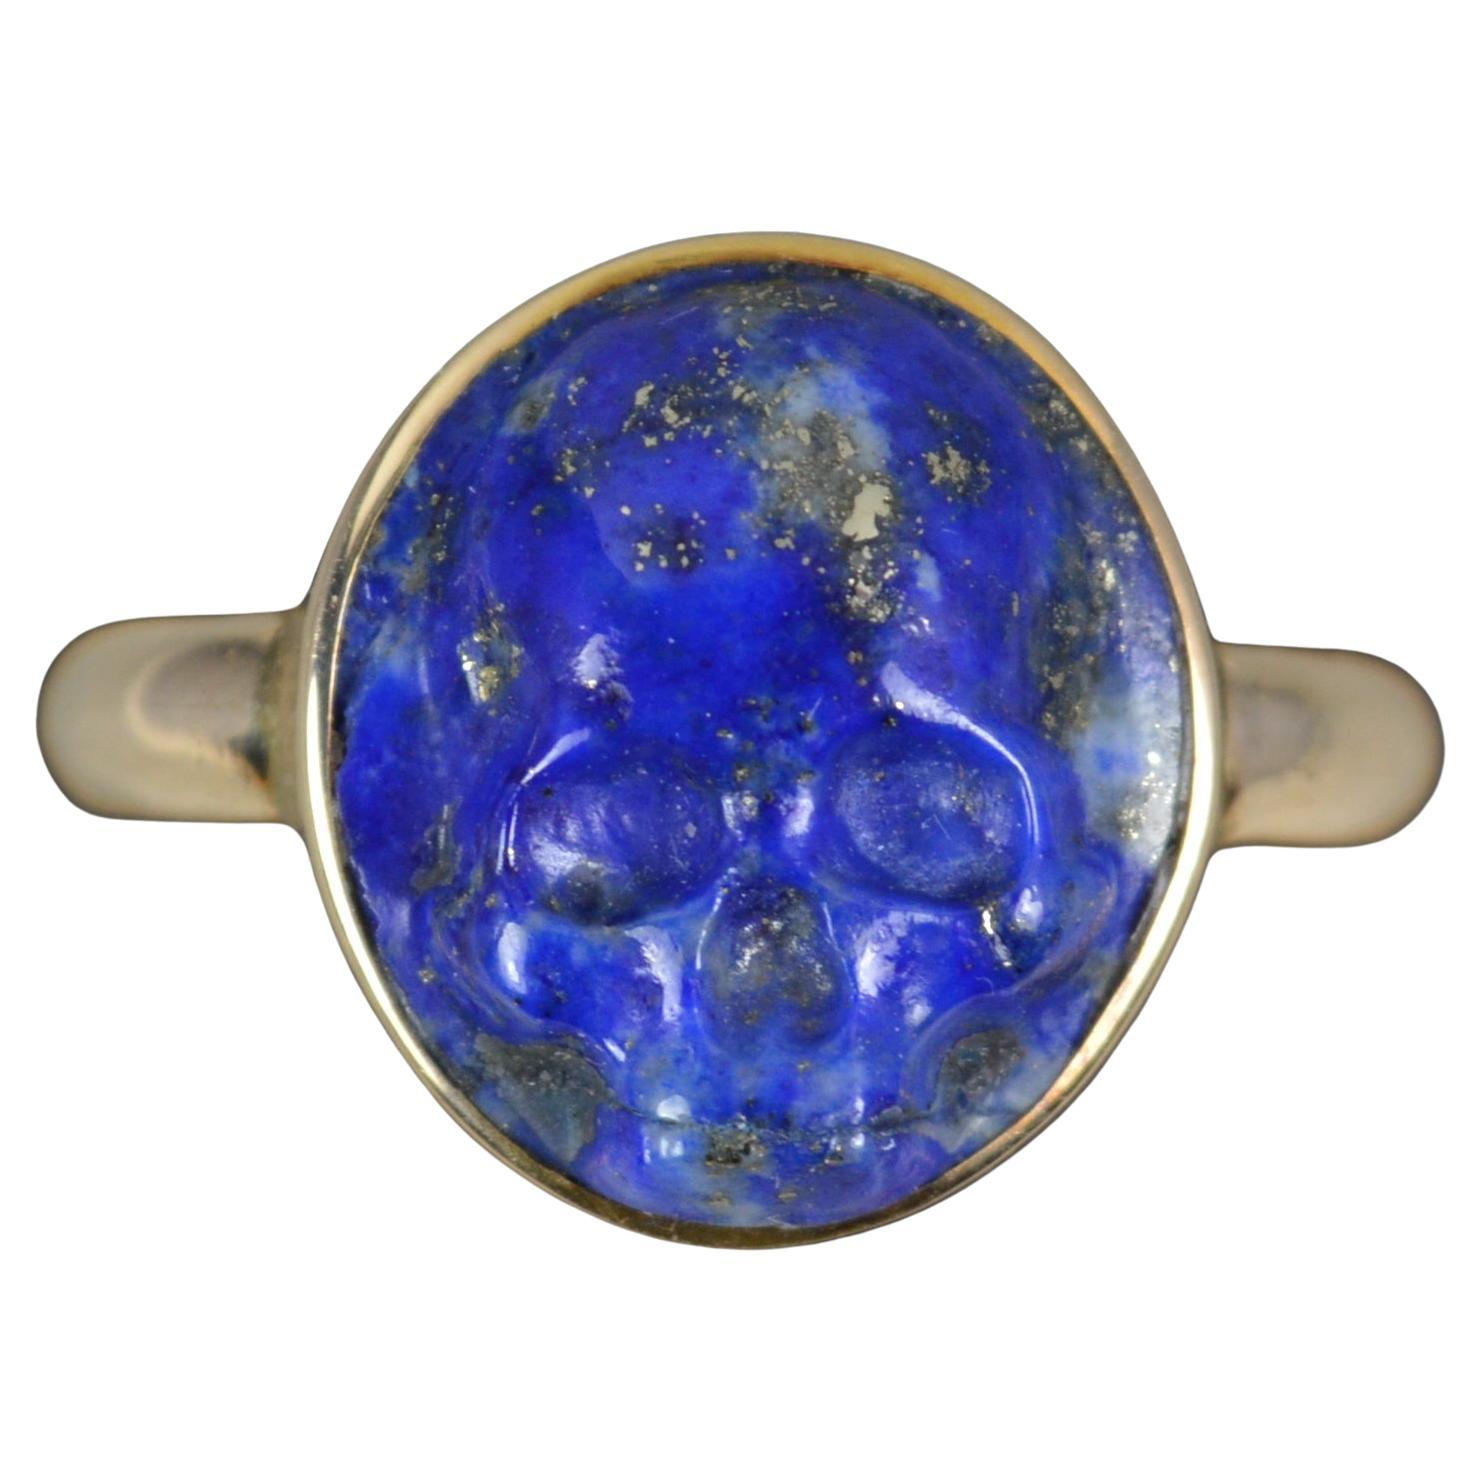 Very Rare Lapis Lazuli Skull and 14ct Gold Signet Momento Mori Ring For Sale